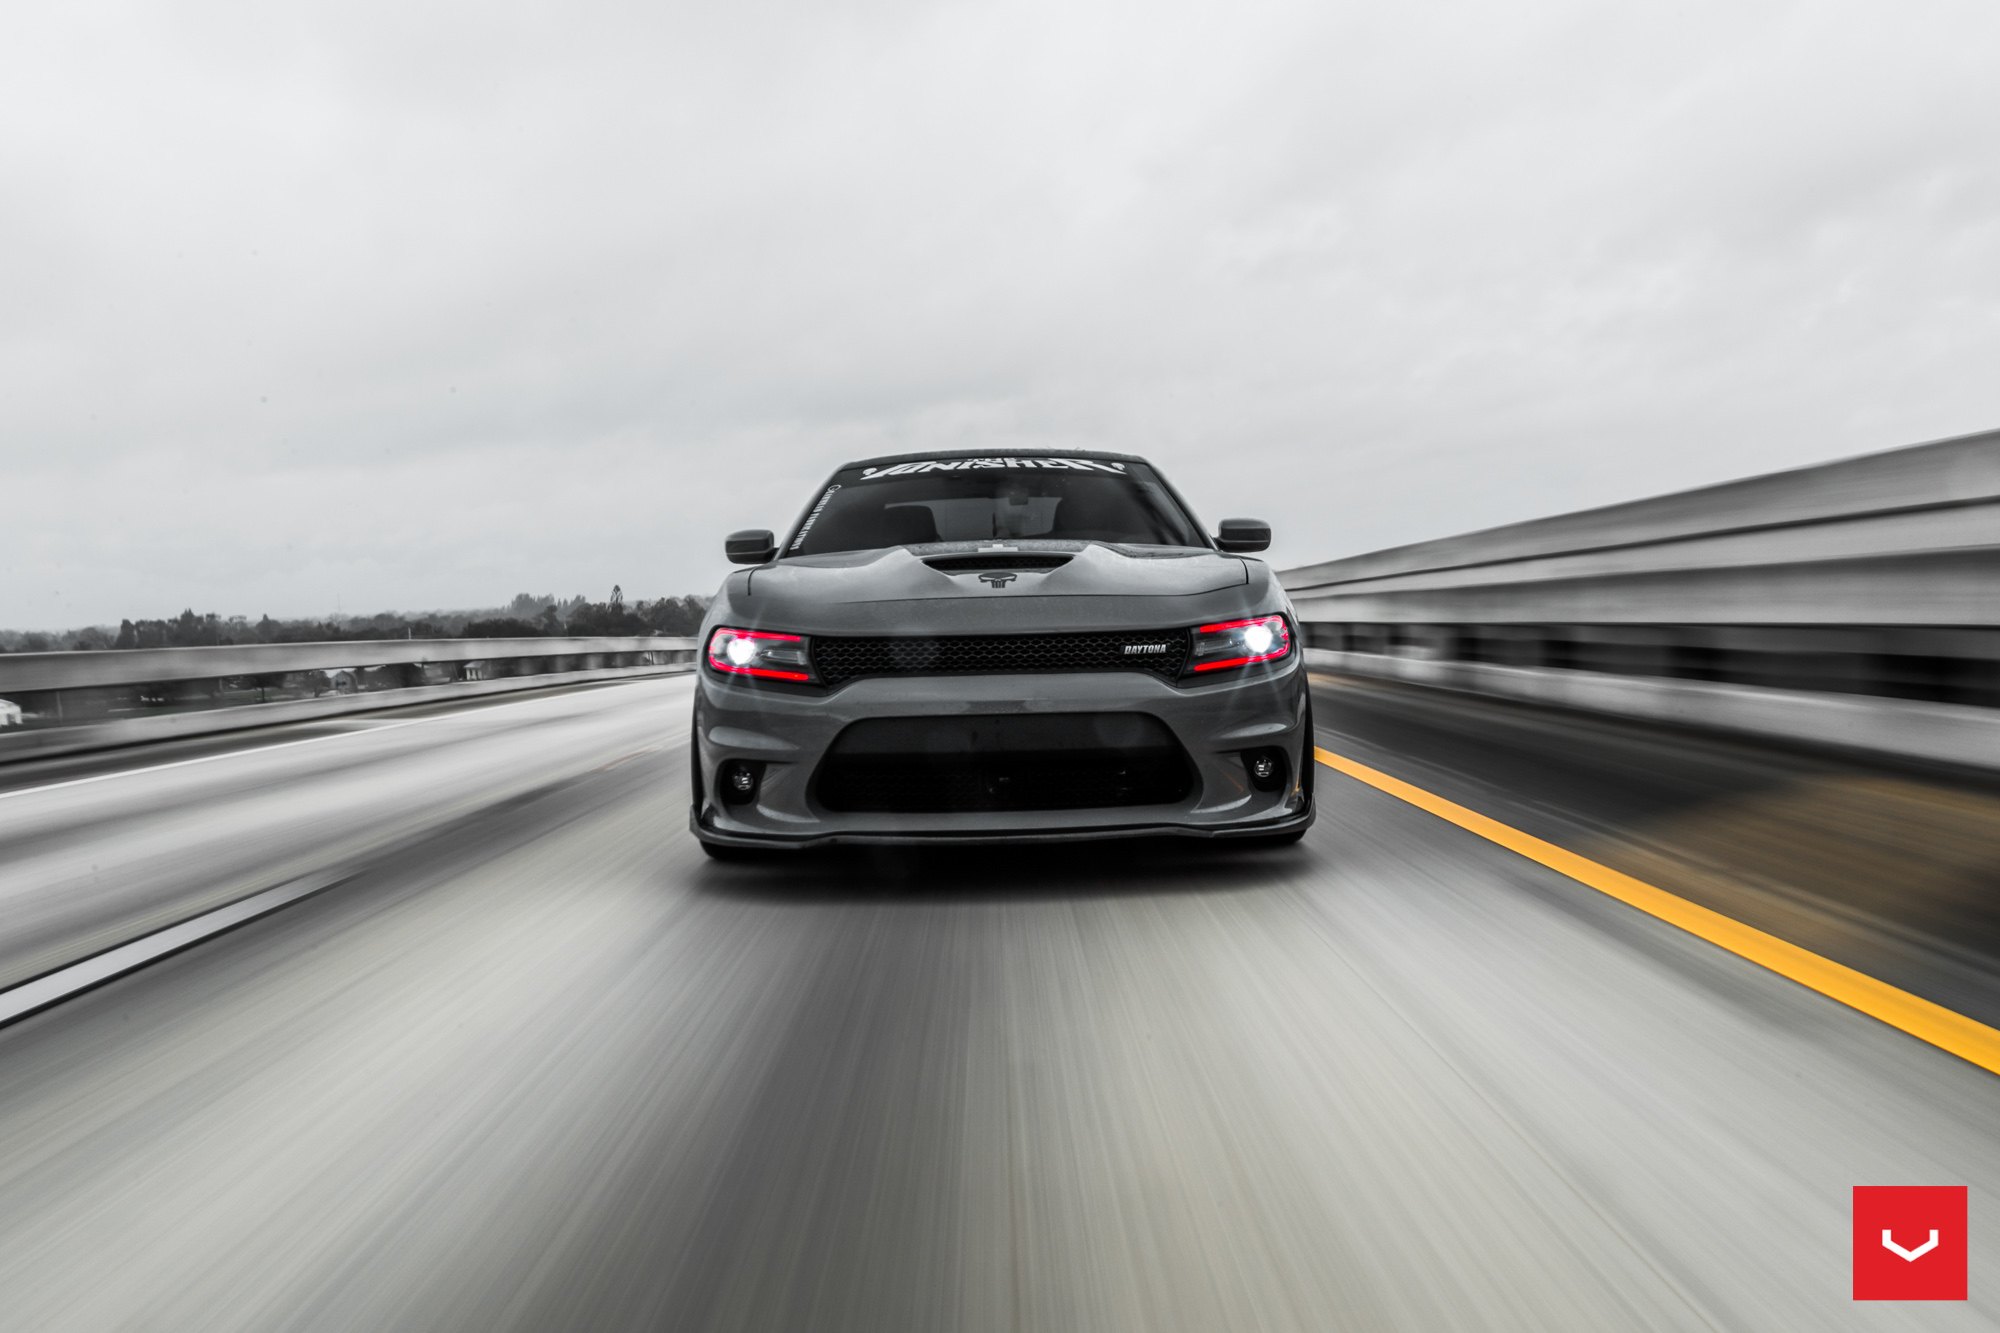 Gray Dodge Charger with Aftermarket Vented Hood - Photo by Vossen